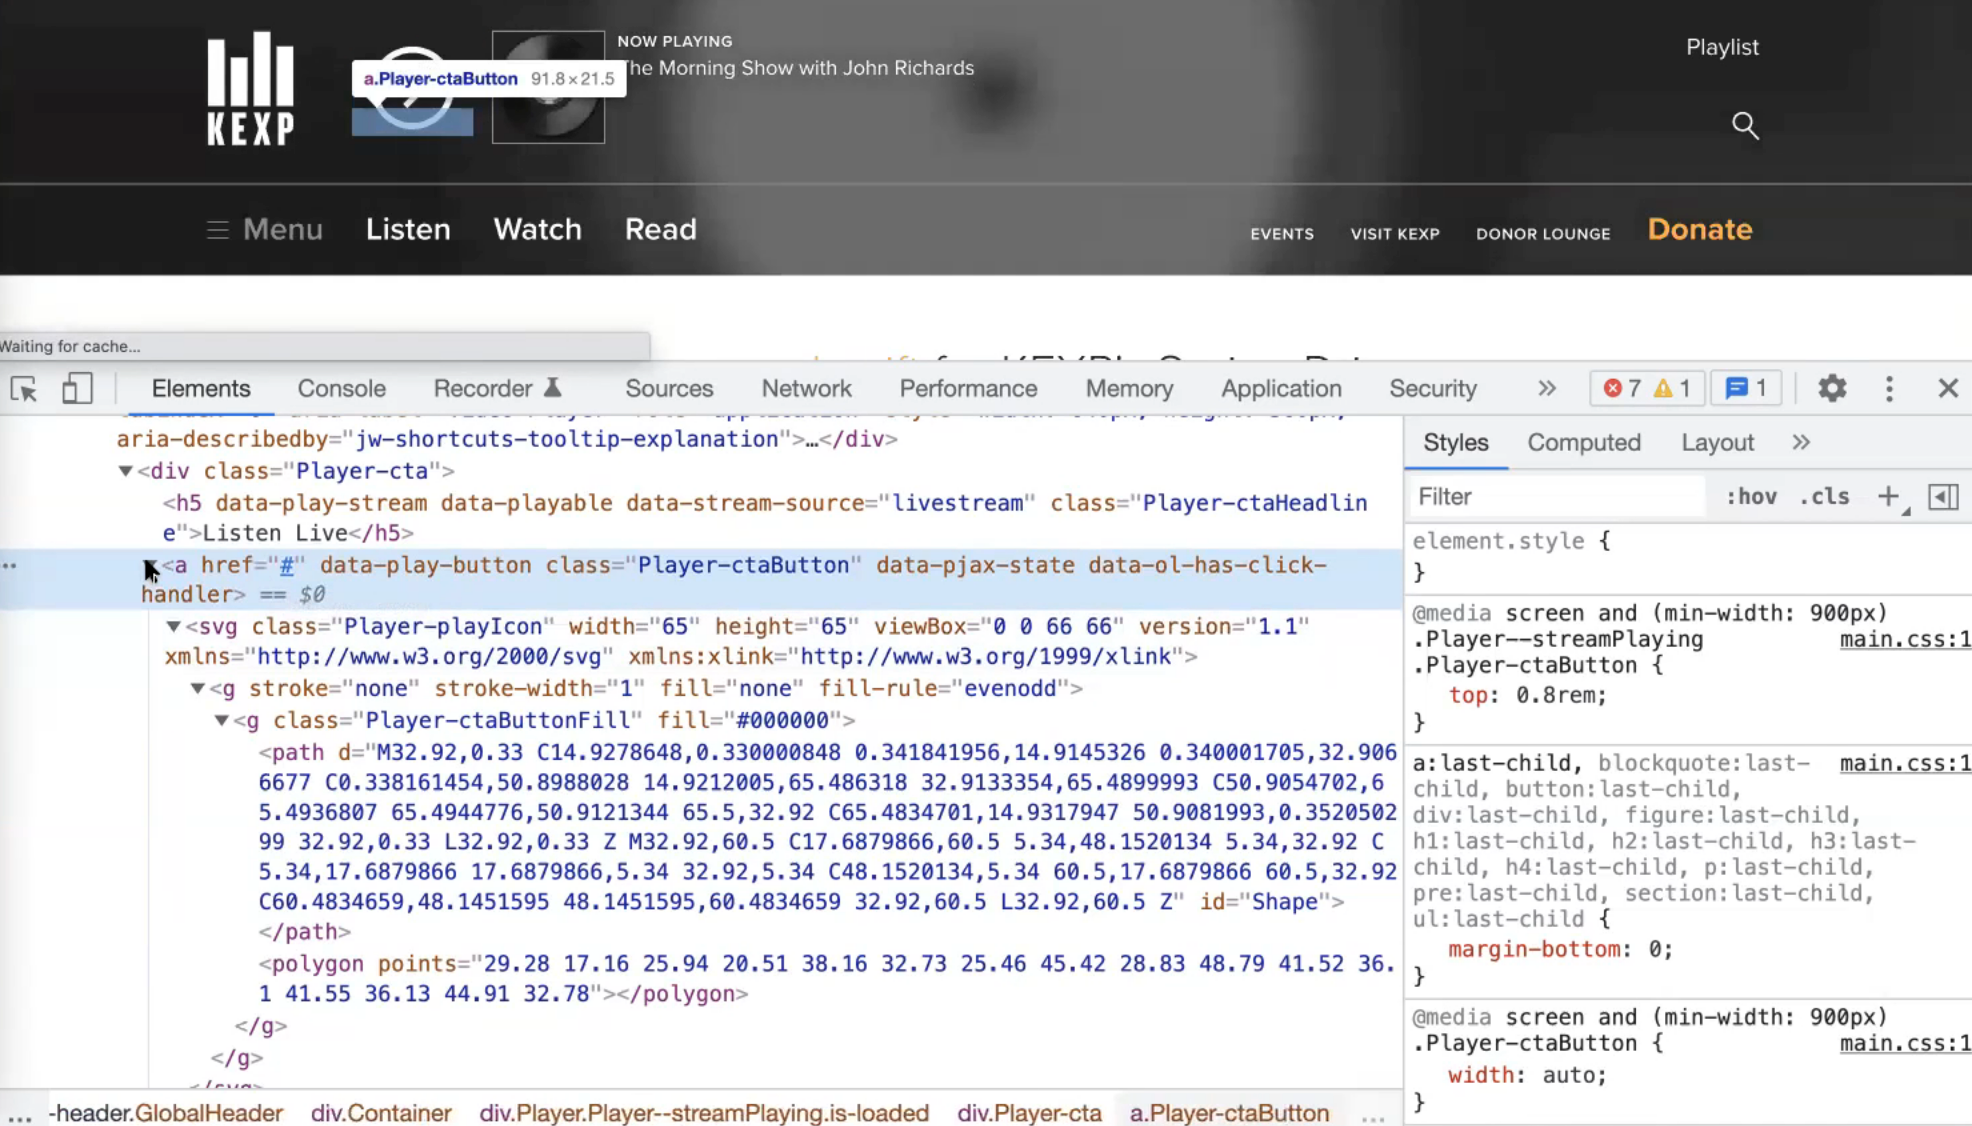 Inspecting the KEXP site in Chrome DevTools